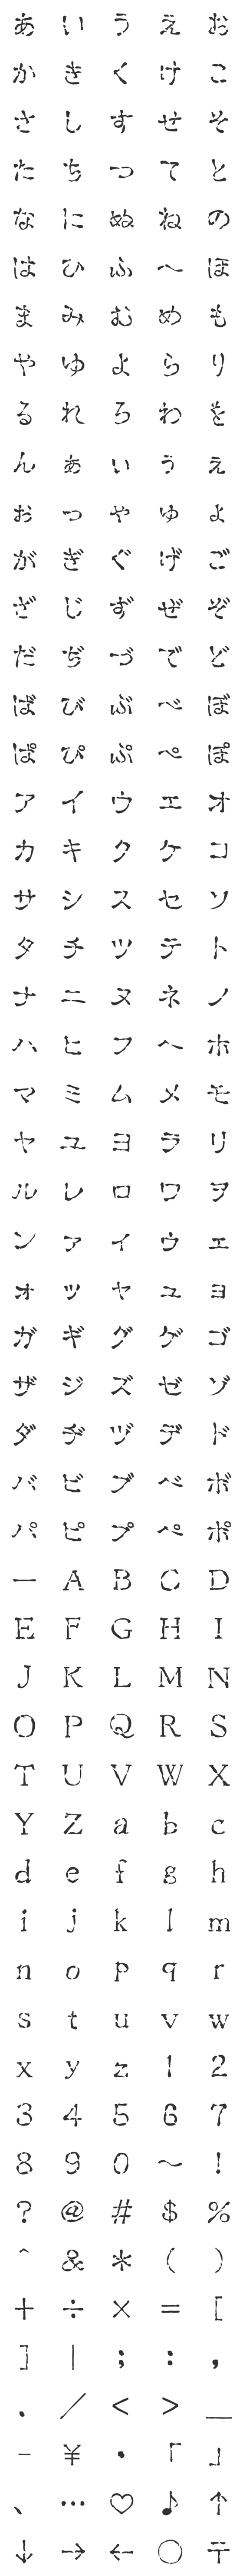 [LINE絵文字]コミック古印体風デコ文字(ハンコ文字)の画像一覧